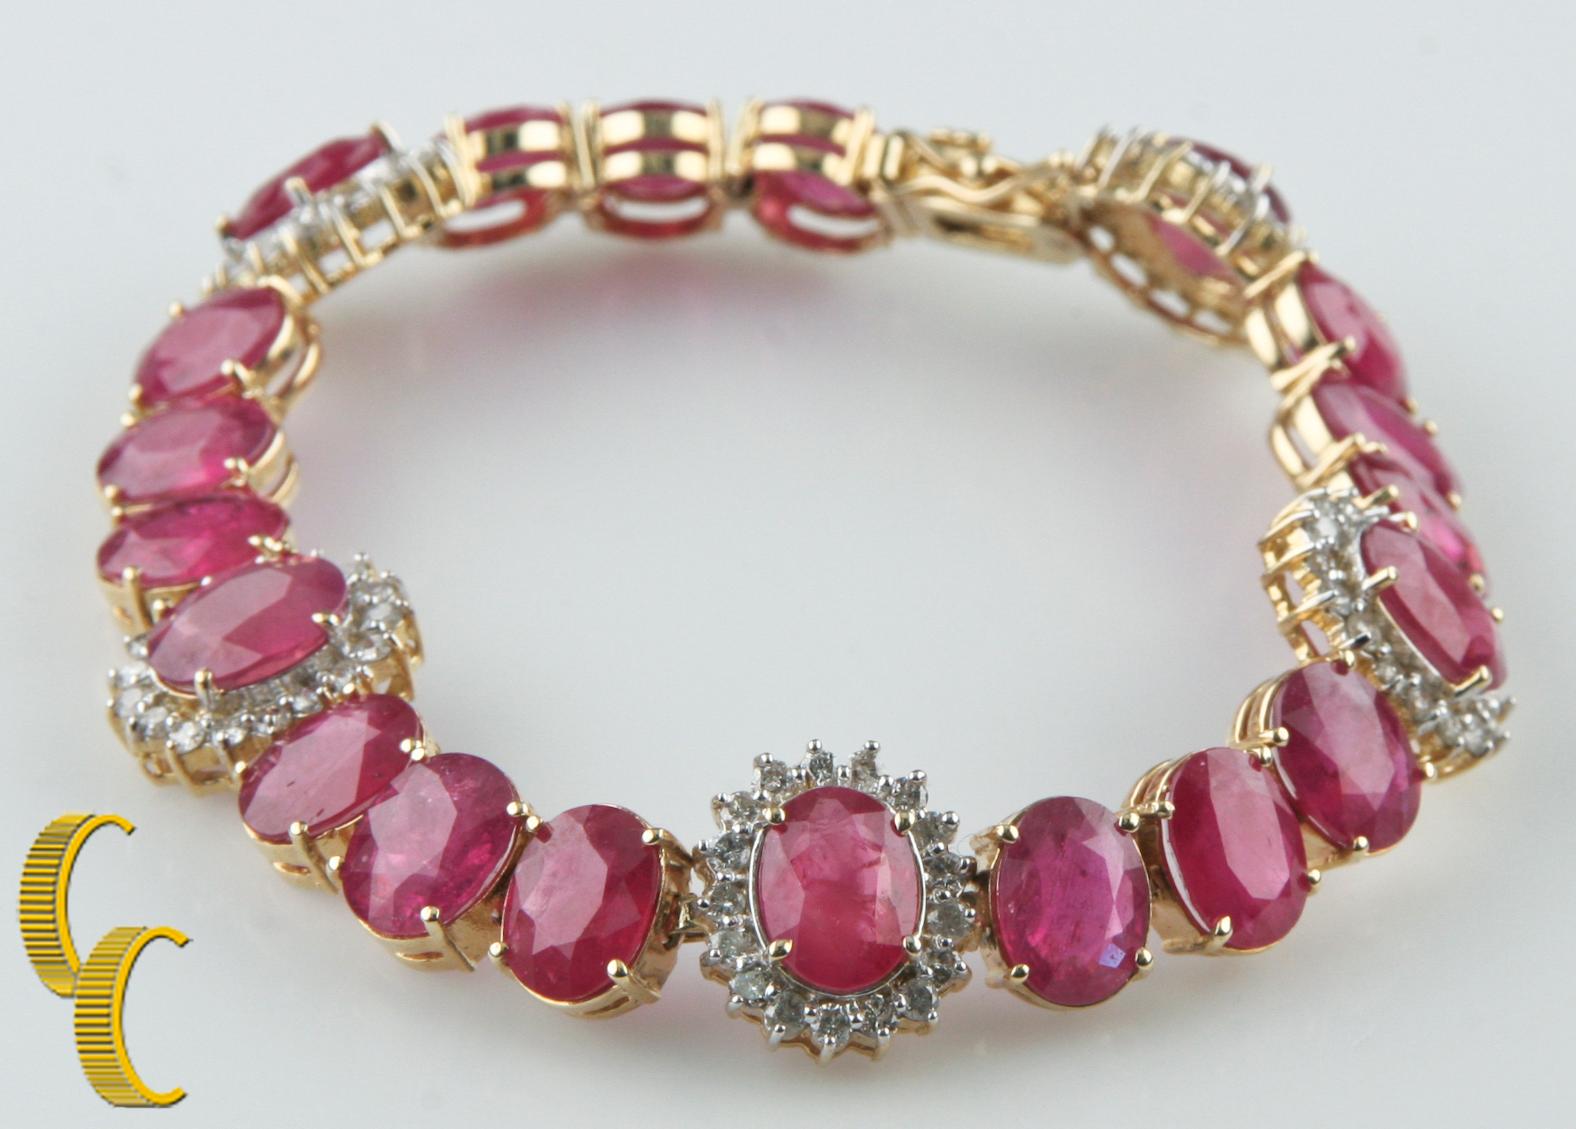 One electronically tested 14KT yellow gold ladies cast & assembled ruby and diamond bracelet
The seven and one-half inch length bracelet features ruby and diamond clusters, interconnected by ruby trios, terminating in a concealed box clasp with